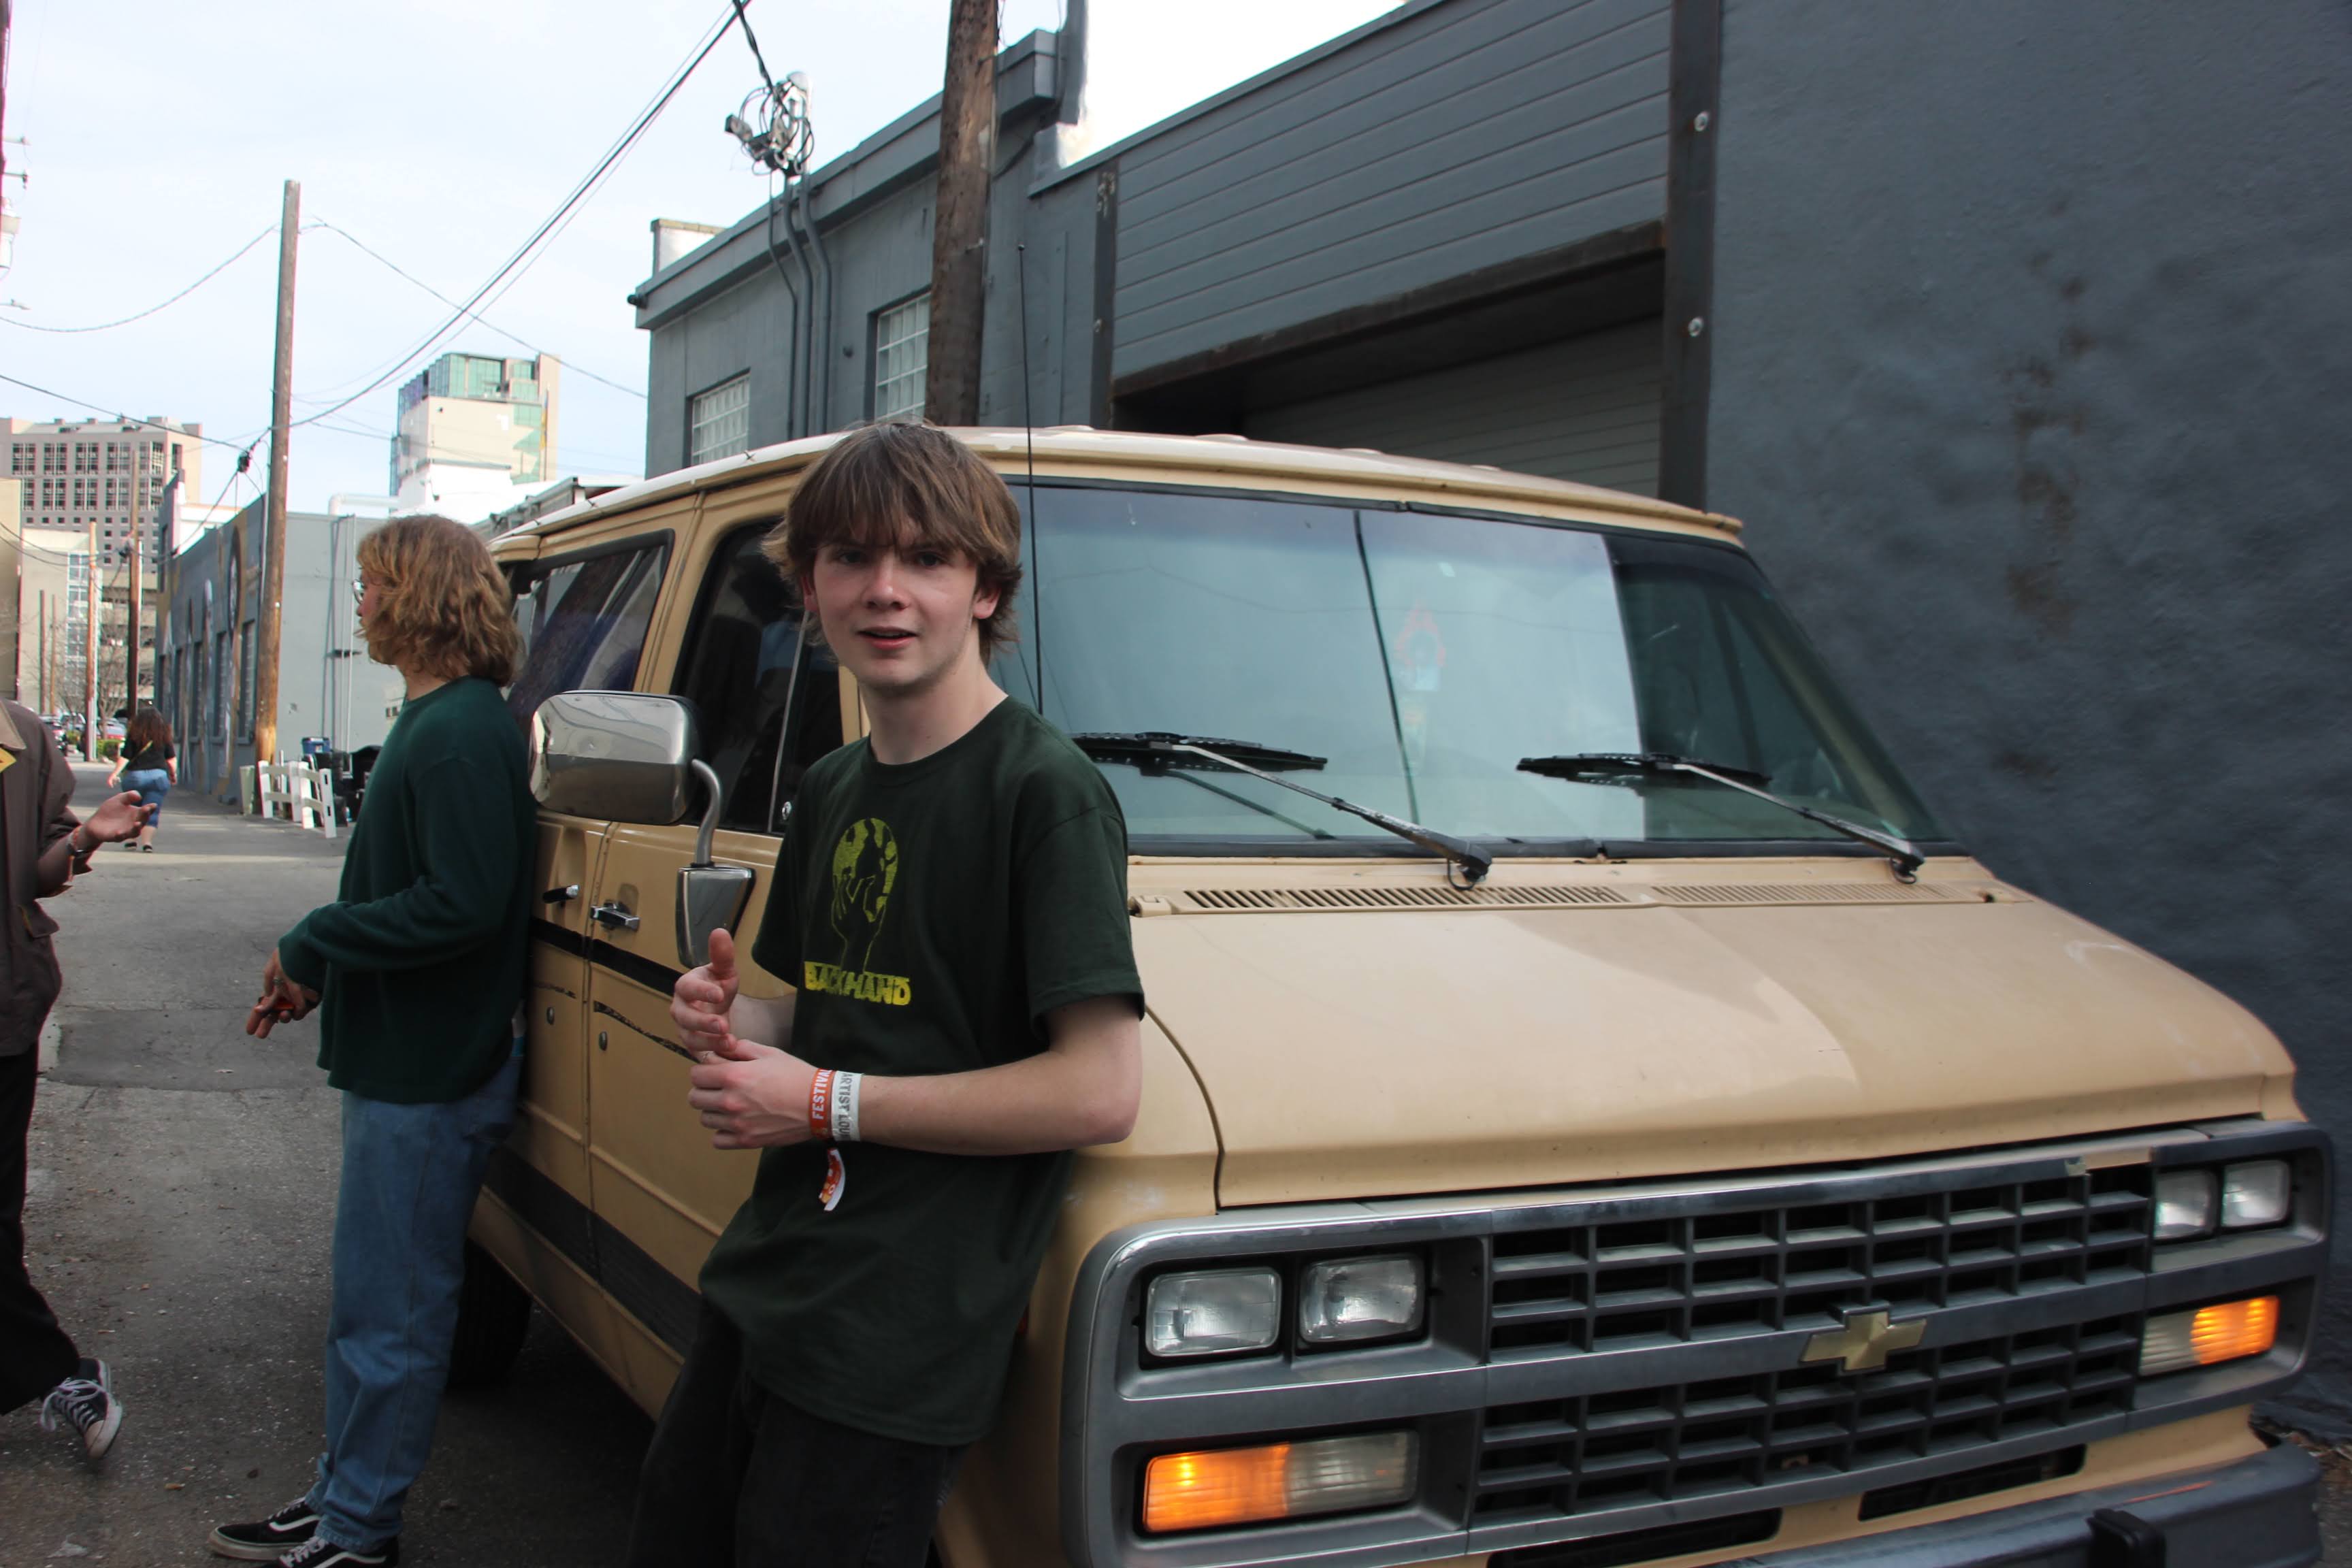 Michael with the band van